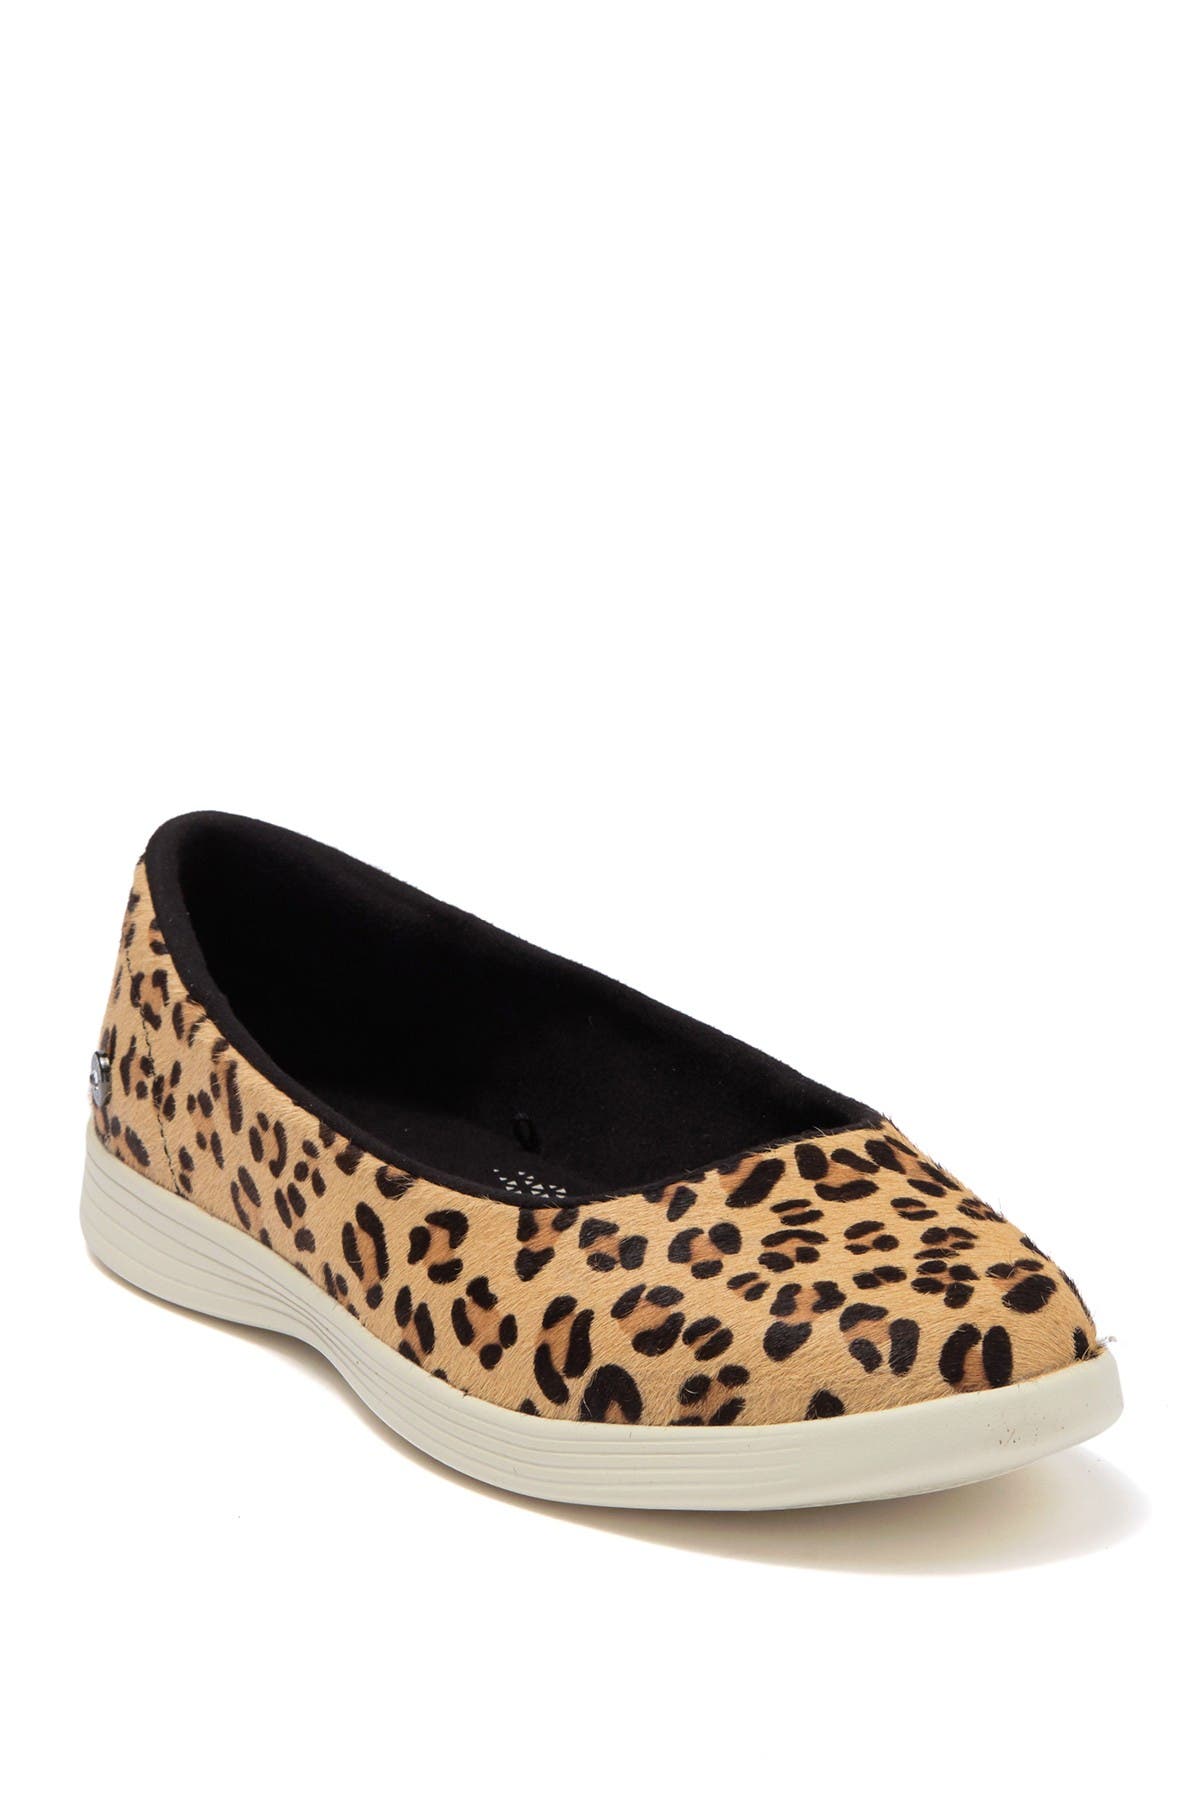 nordstrom rack womens shoes flats